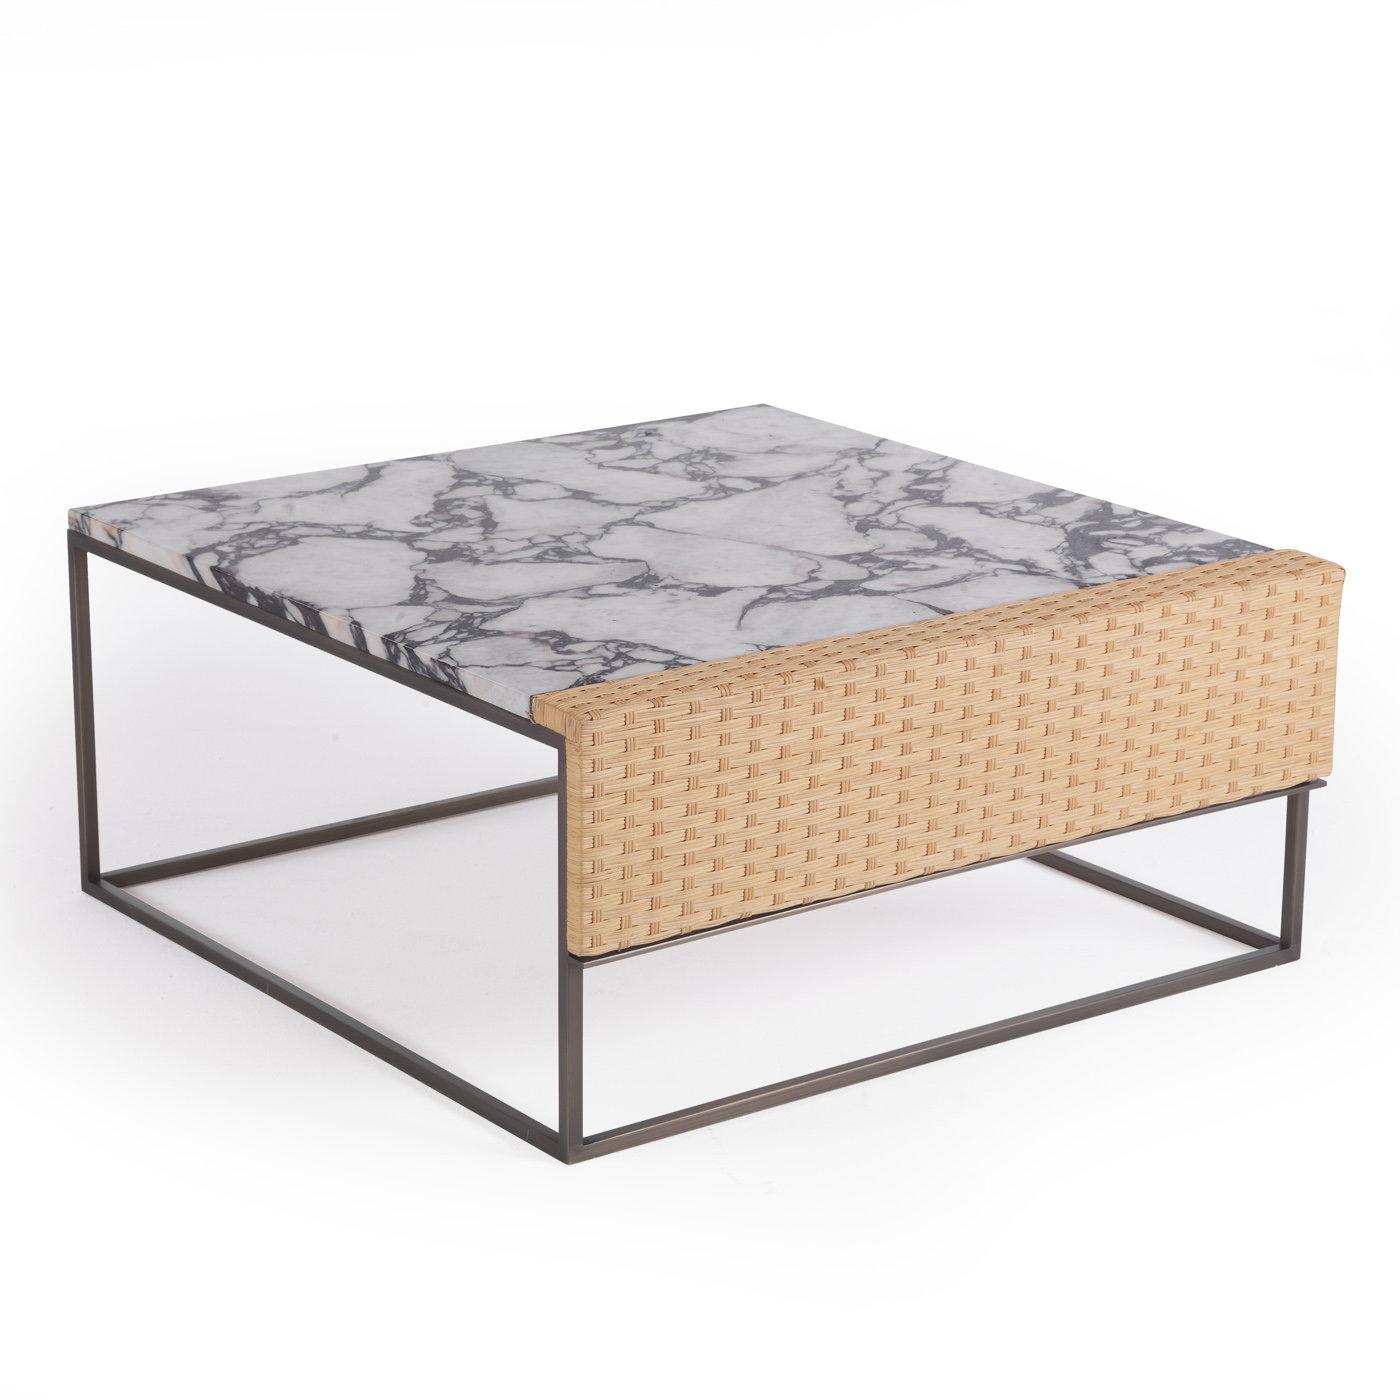 This coffee table is a statement piece that combines unique, refined materials into a modern and versatile design. The cubic structure is made of brushed brass and features a splendid top in purple Calacatta marble showcasing natural veins and